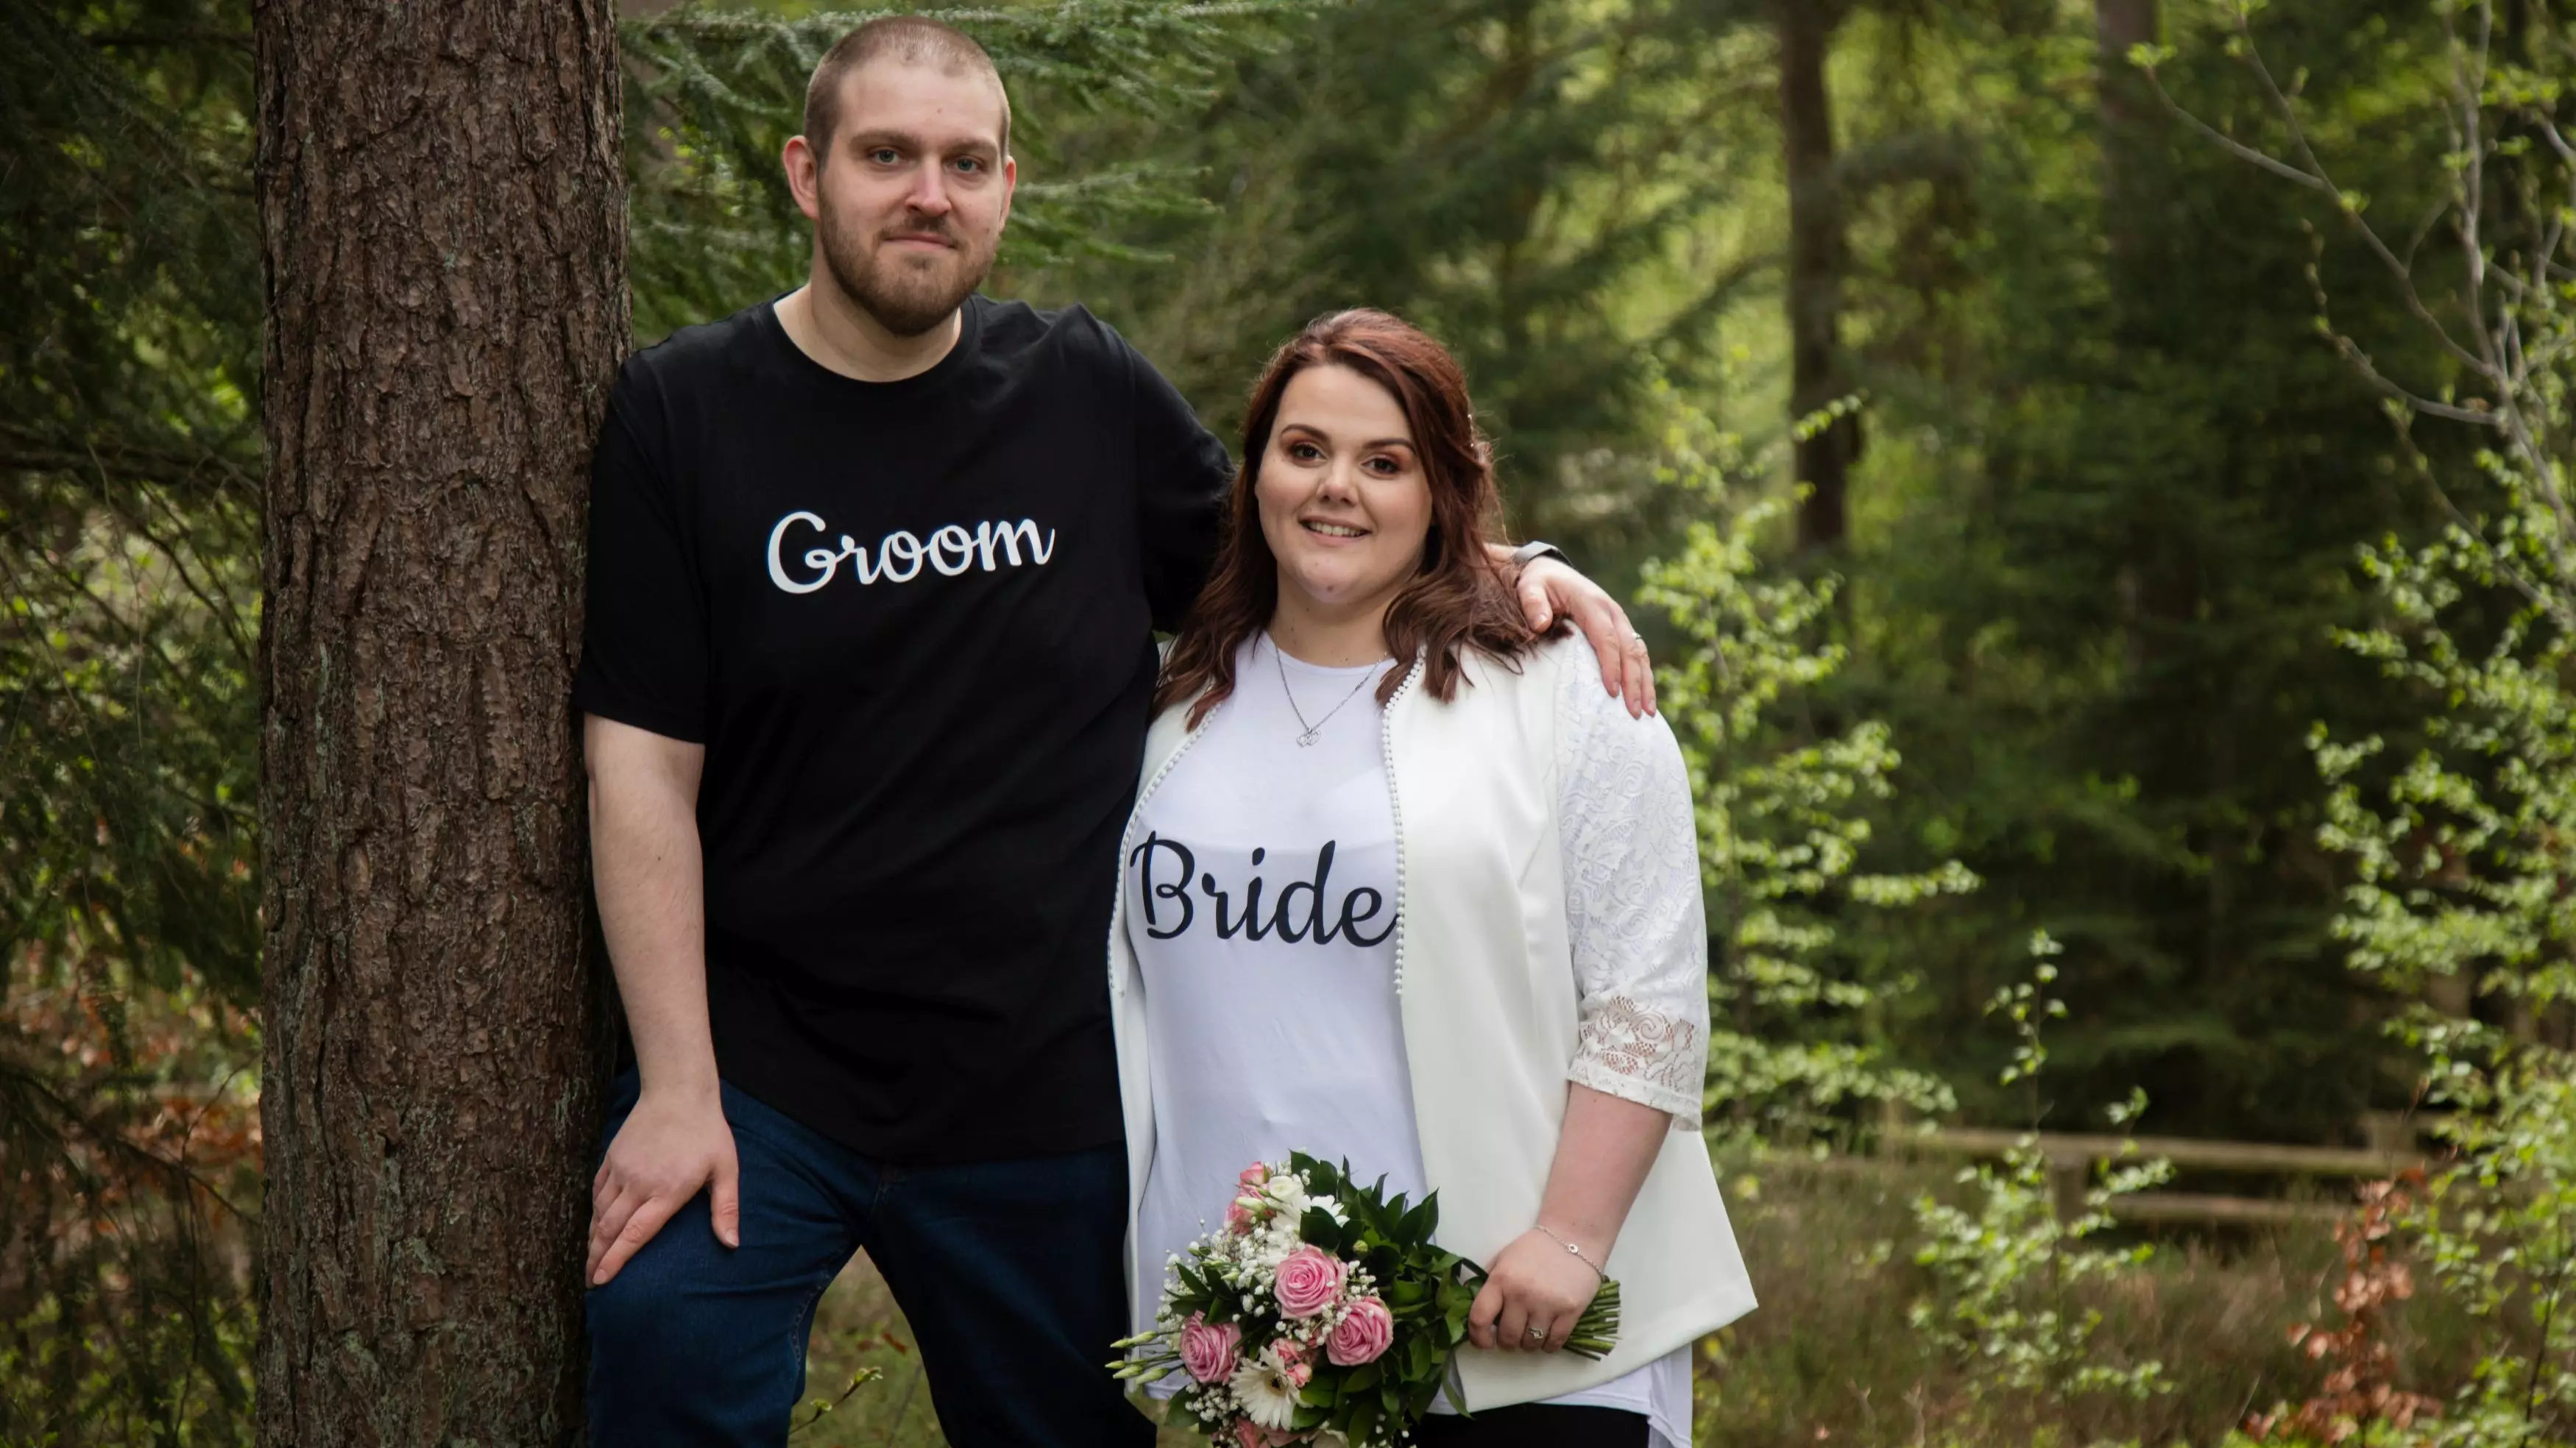 Couple Don Skinny Jeans And Personalised T-Shirts For Wedding To Help Save £13k